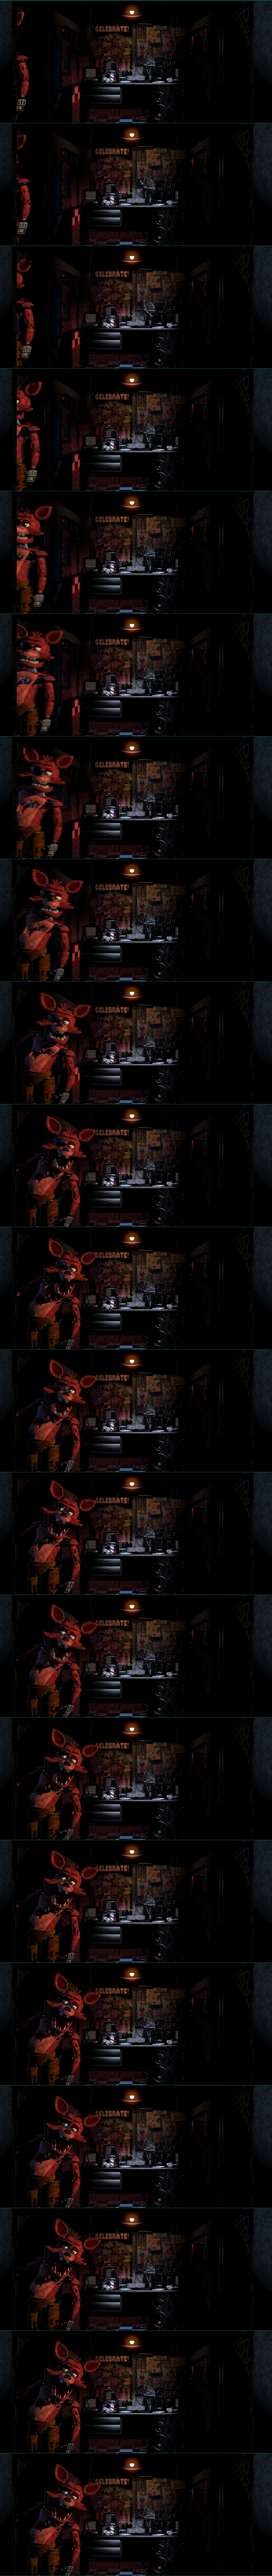 Five Nights at Freddy's - Foxy Jumpscare